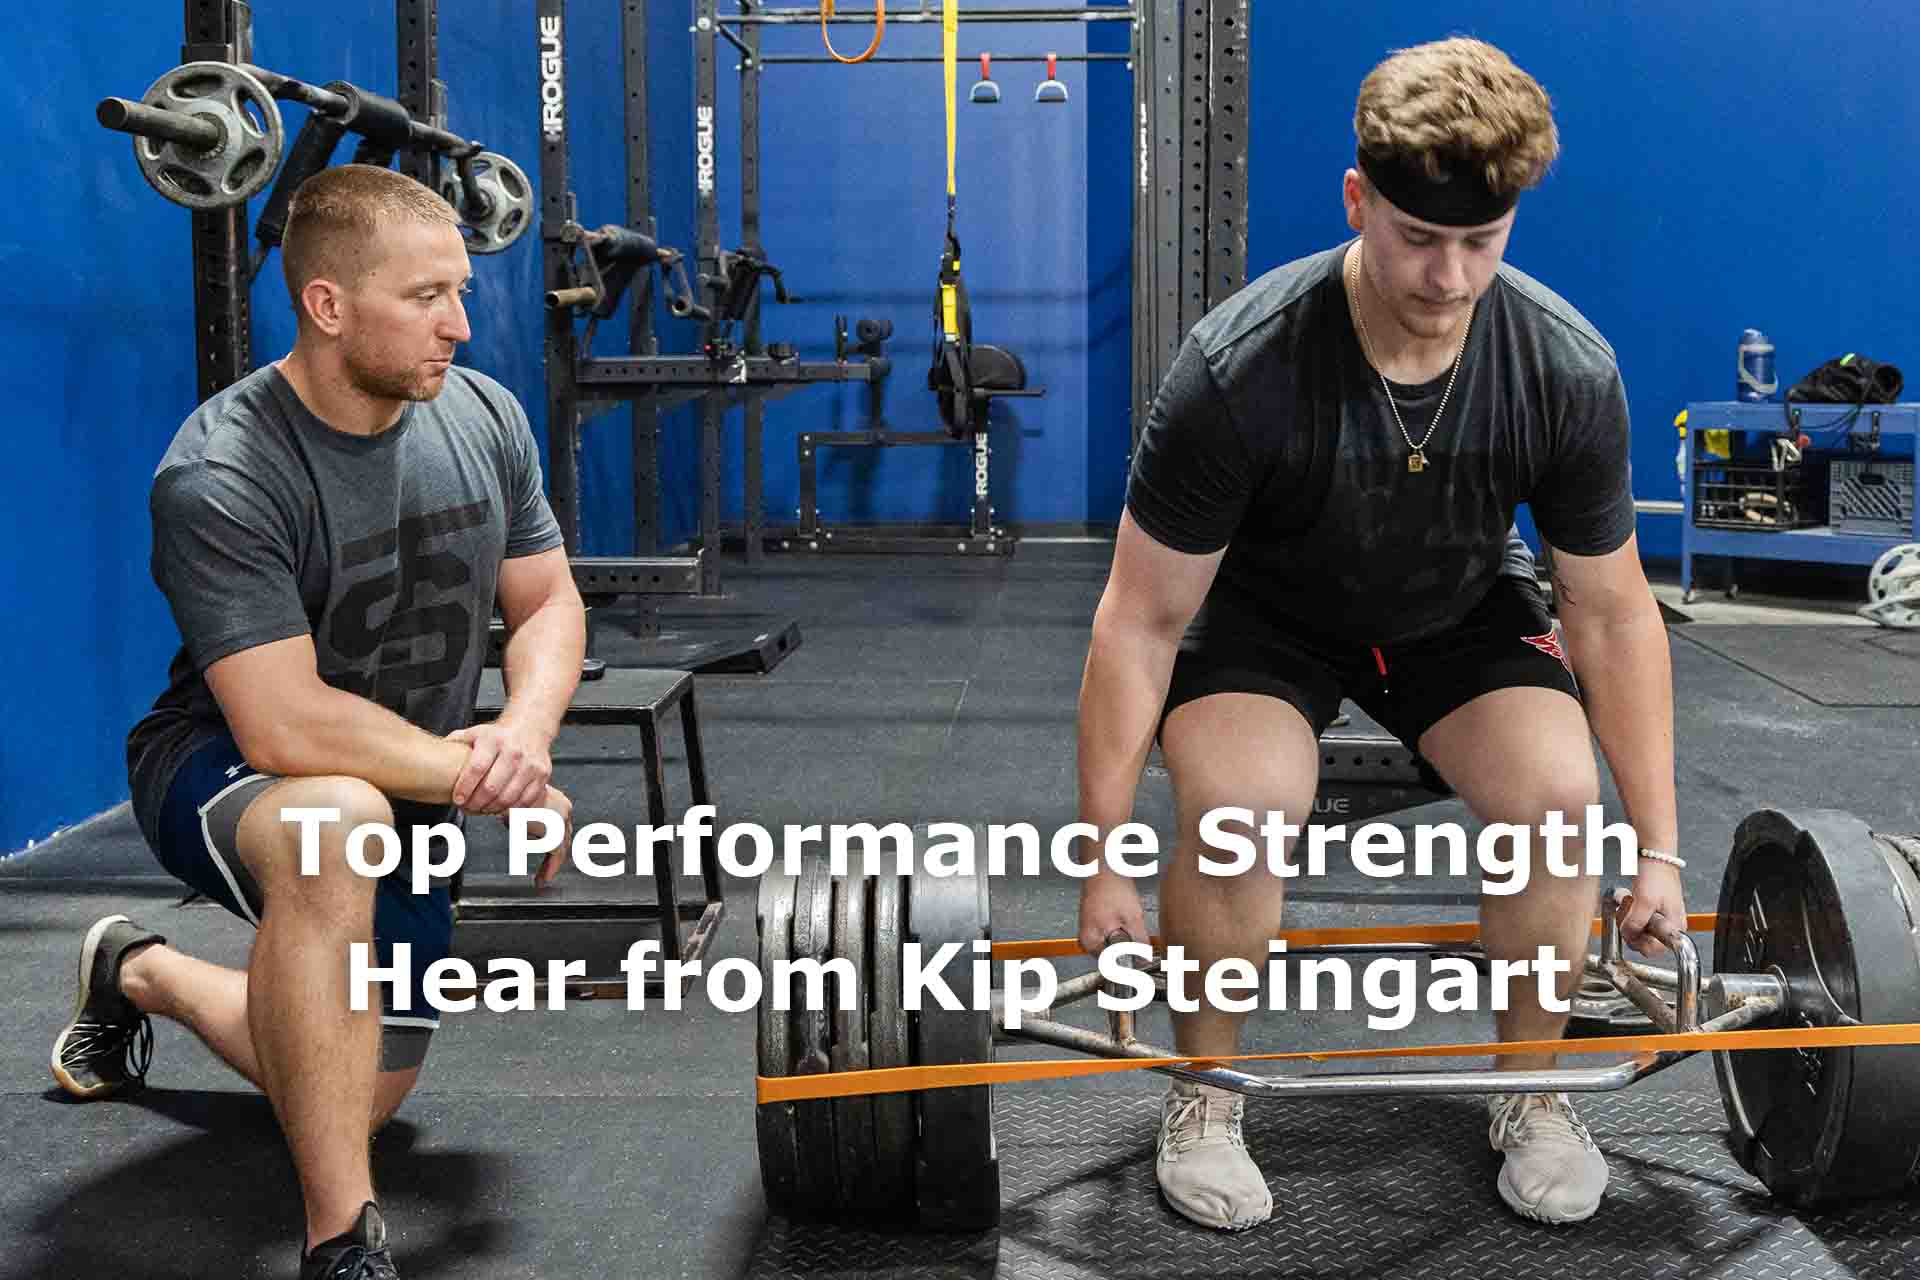 Strength Training for Athletes - Strength Performance Top